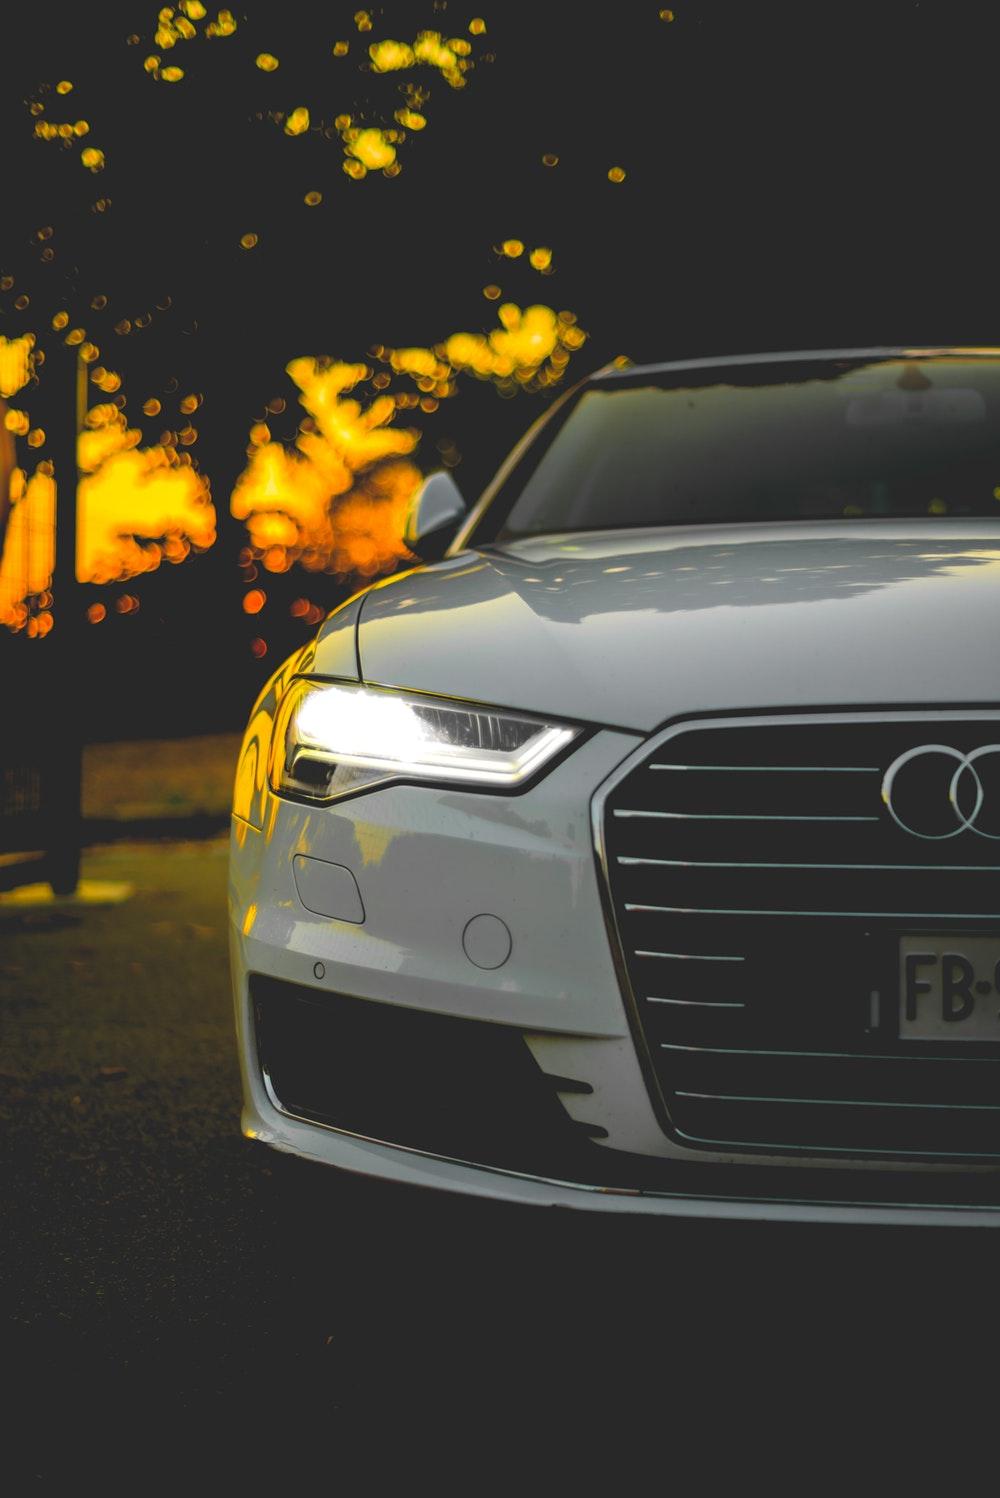 Audi Picture [HD]. Download Free Image